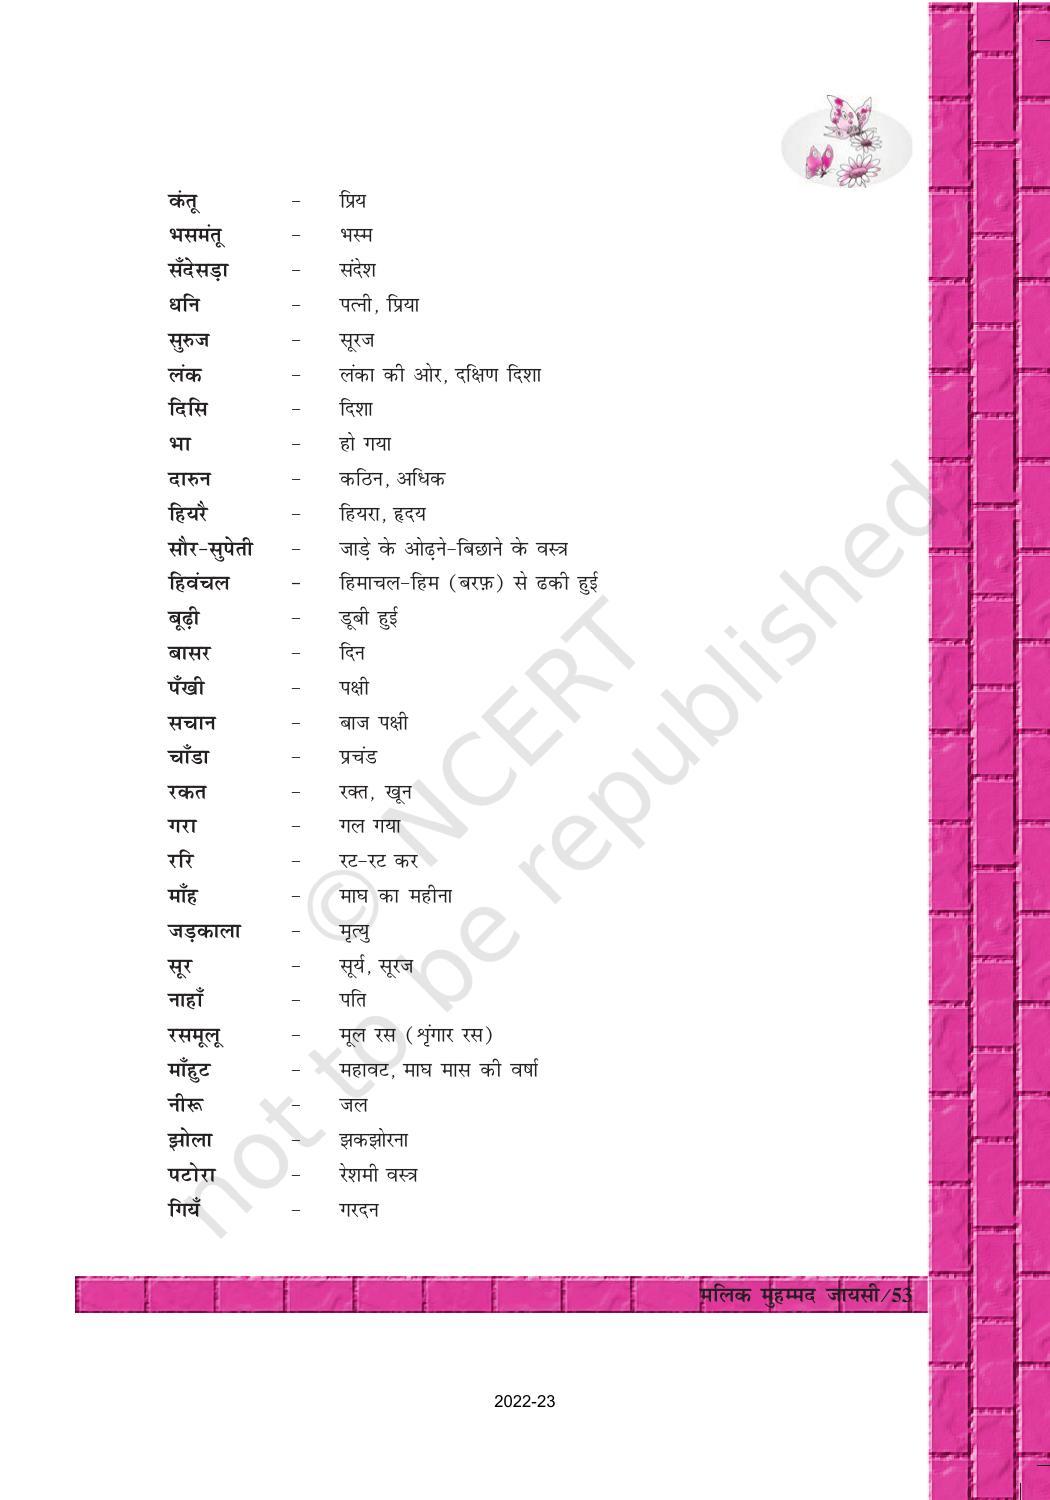 NCERT Book for Class 12 Hindi Antra Chapter 8 मलिक मुहम्मद जायसी - Page 6